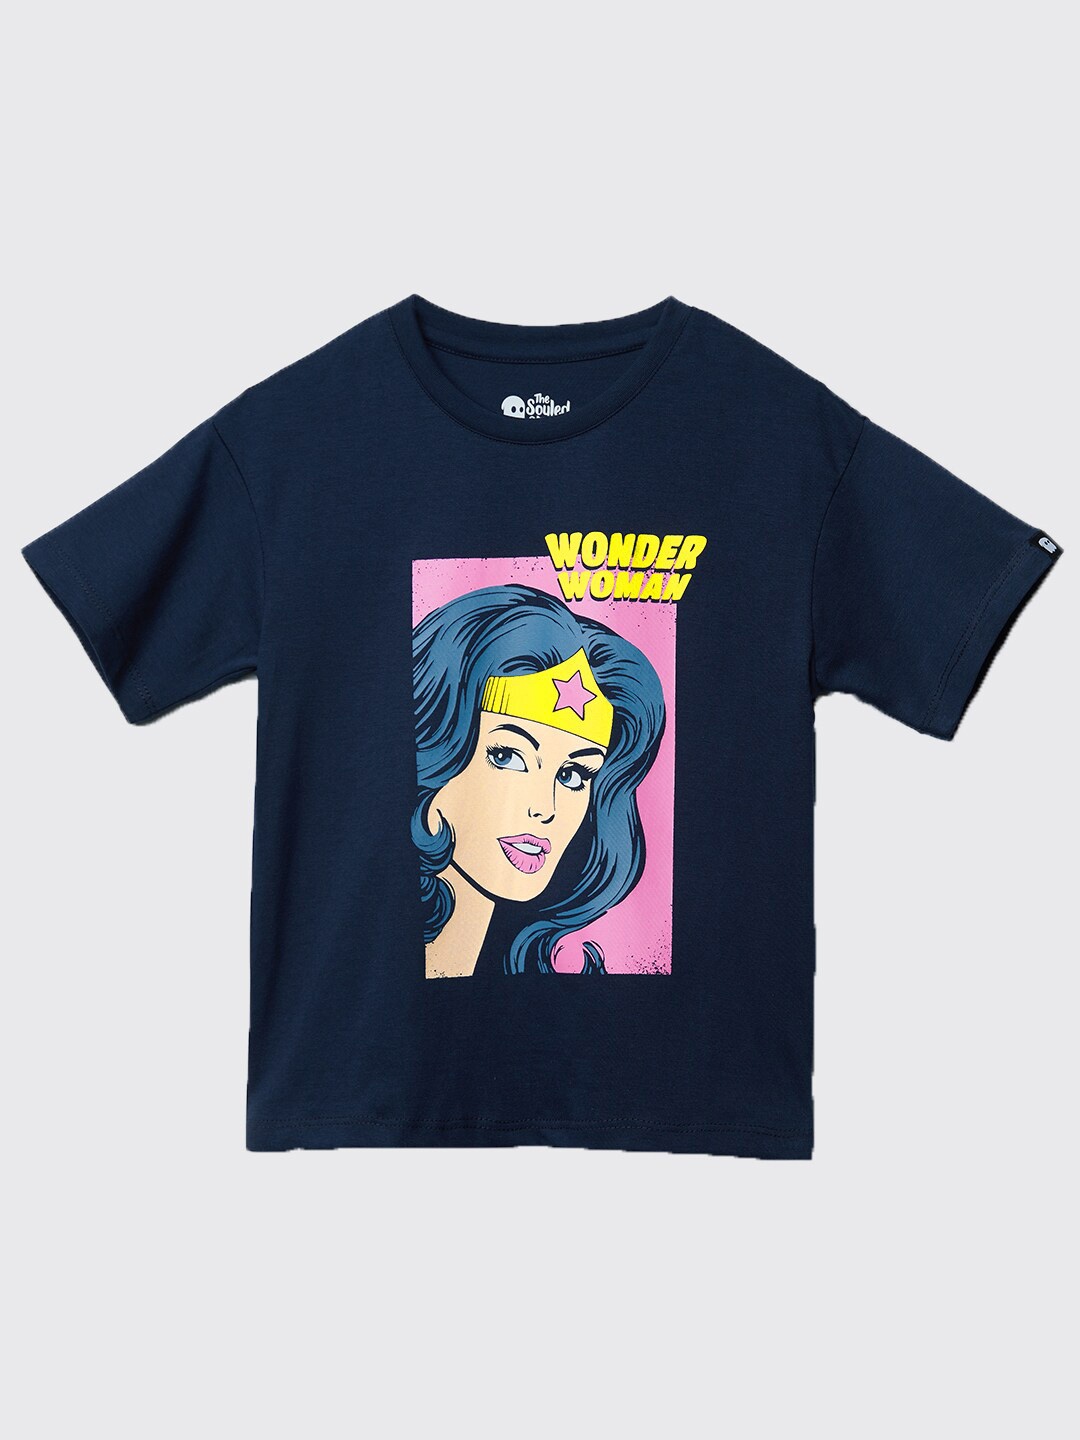 

The Souled Store Girls Navy Blue Wonder Woman Printed Cotton Oversized T-shirt